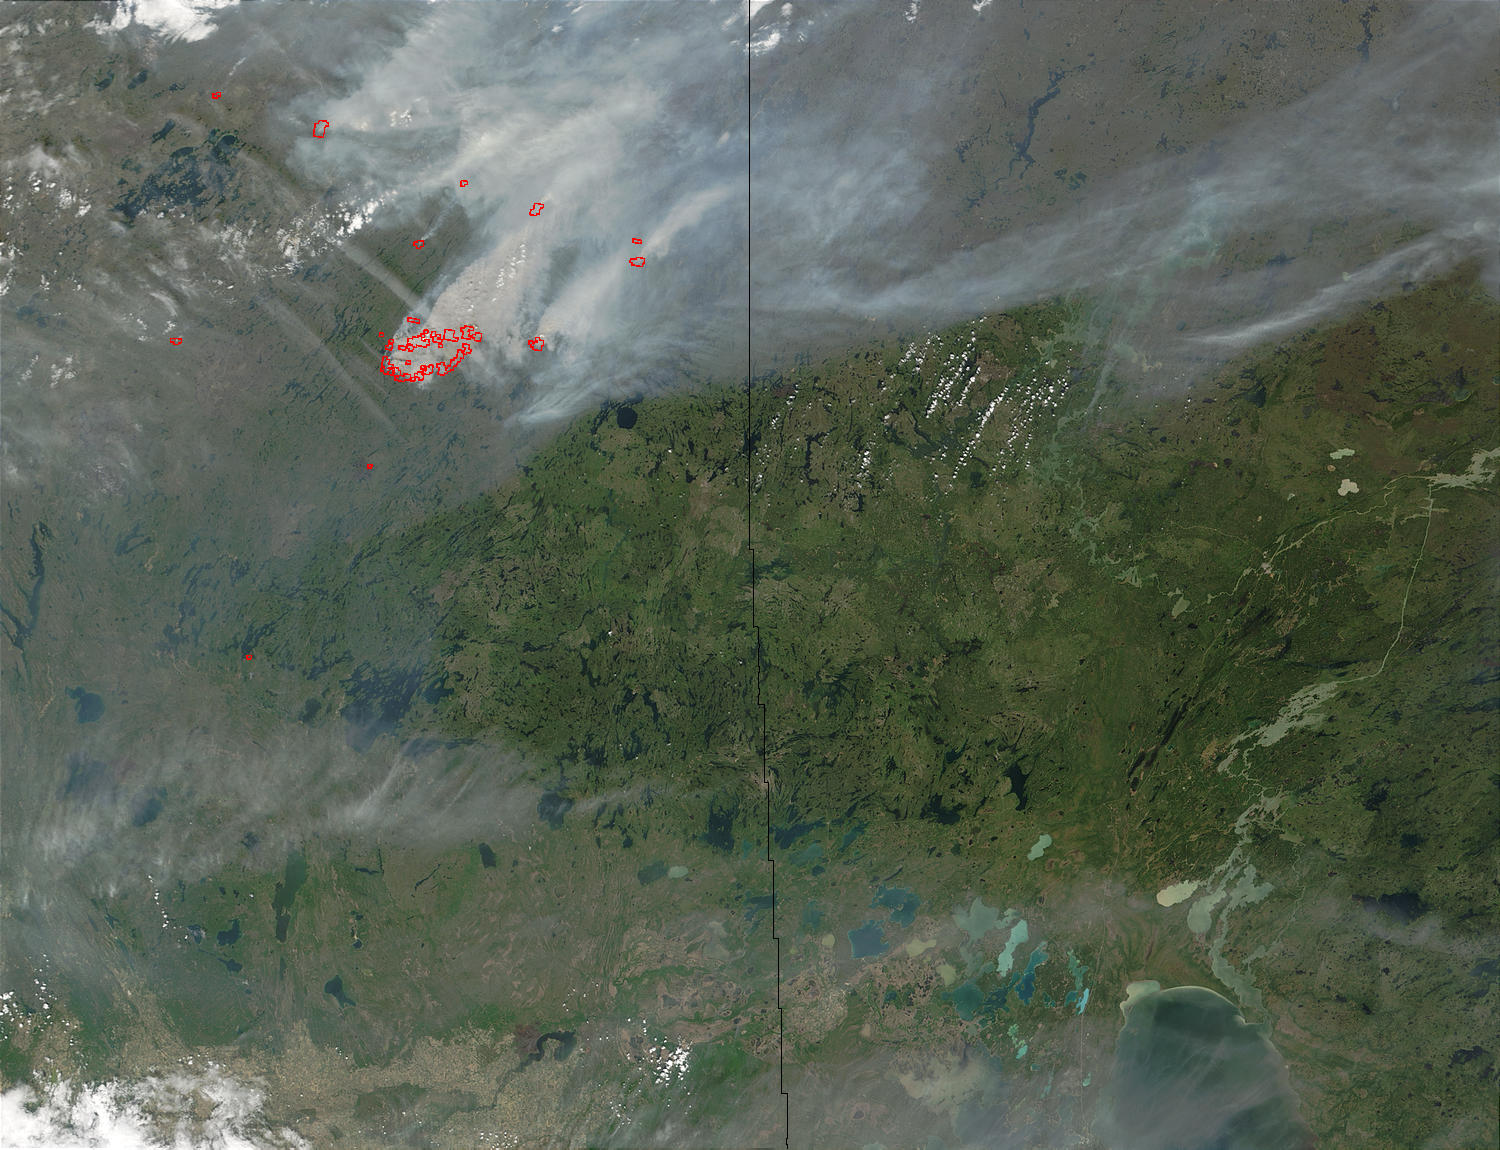 Wildfires and smoke in Saskatchewan, Canada - related image preview